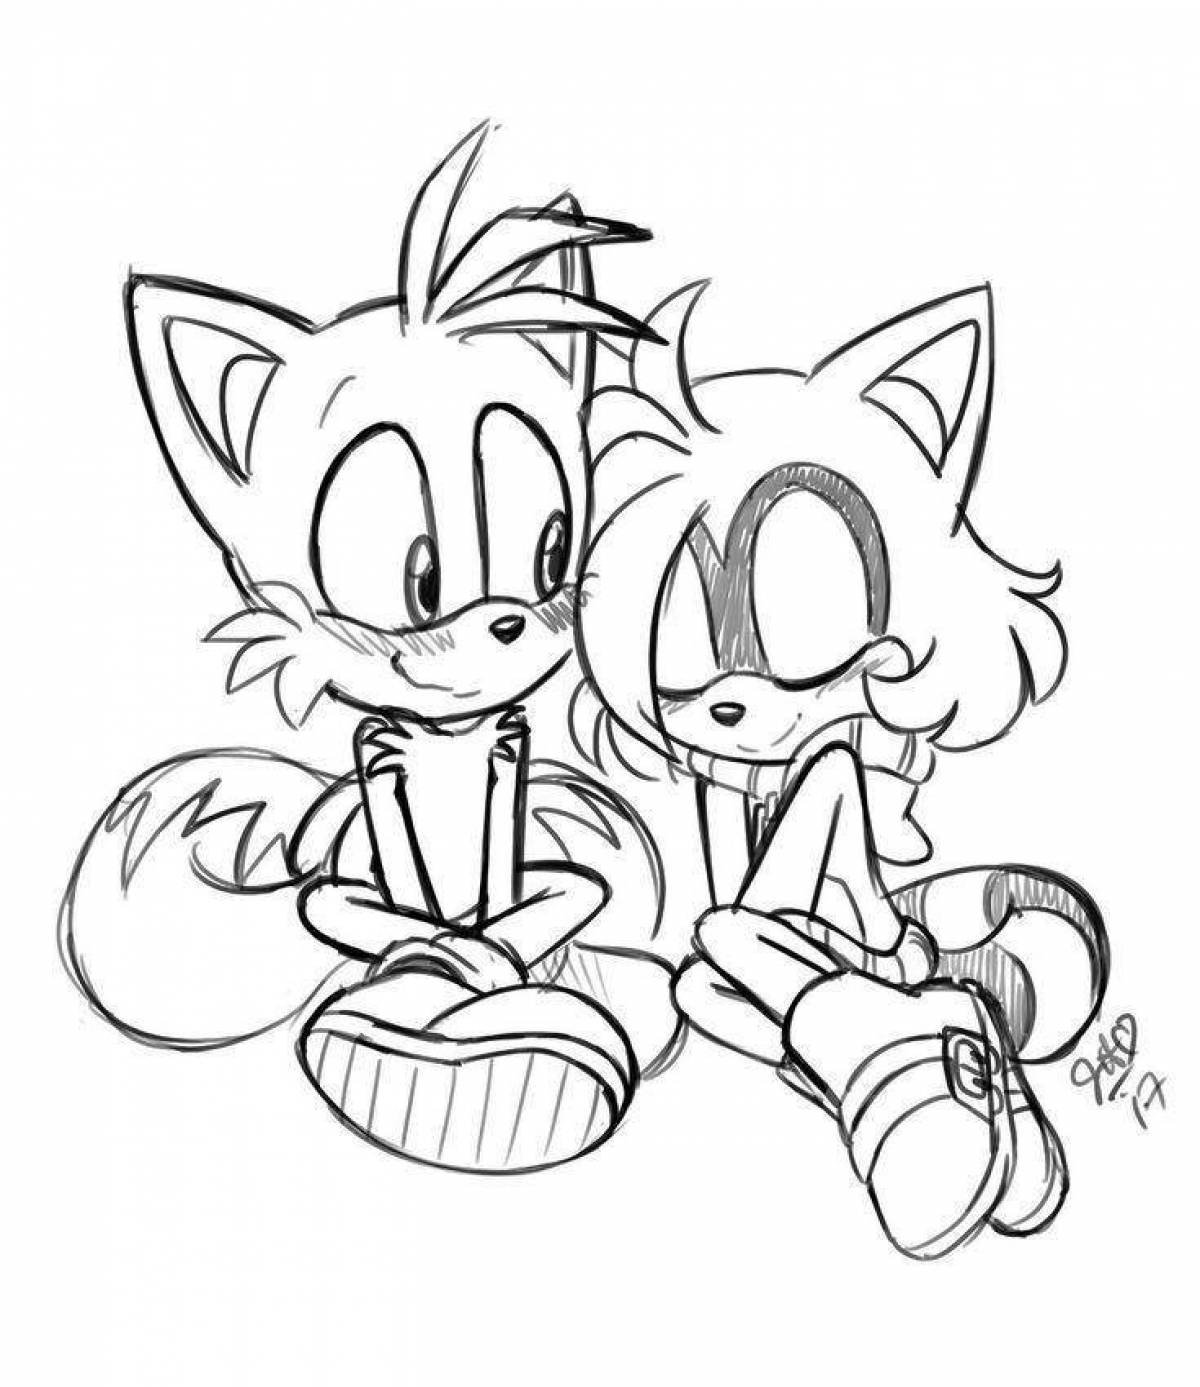 Exquisite sonic and tails coloring book